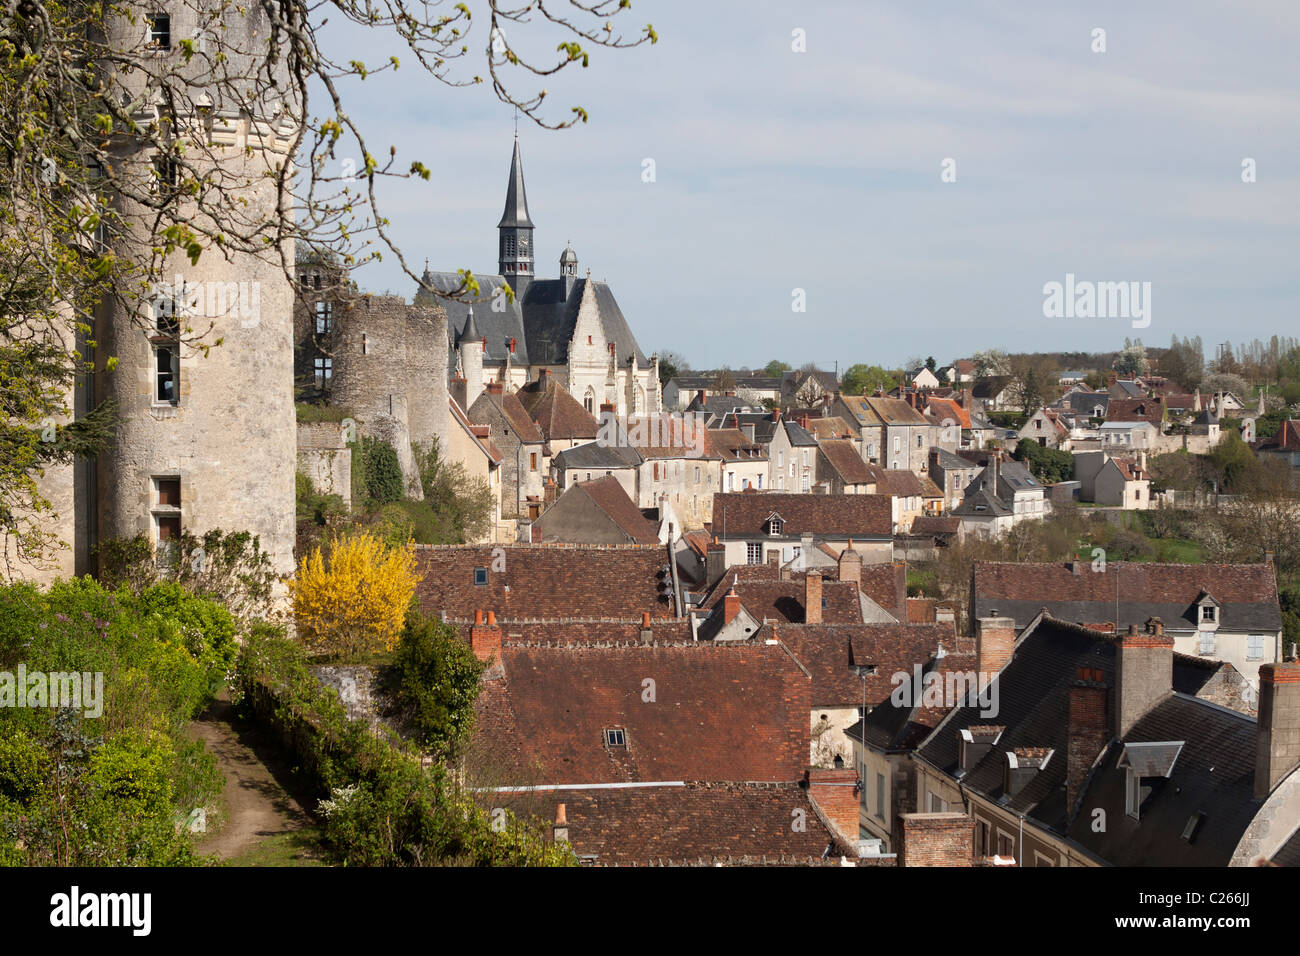 Castle and church of Montresor, France Stock Photo